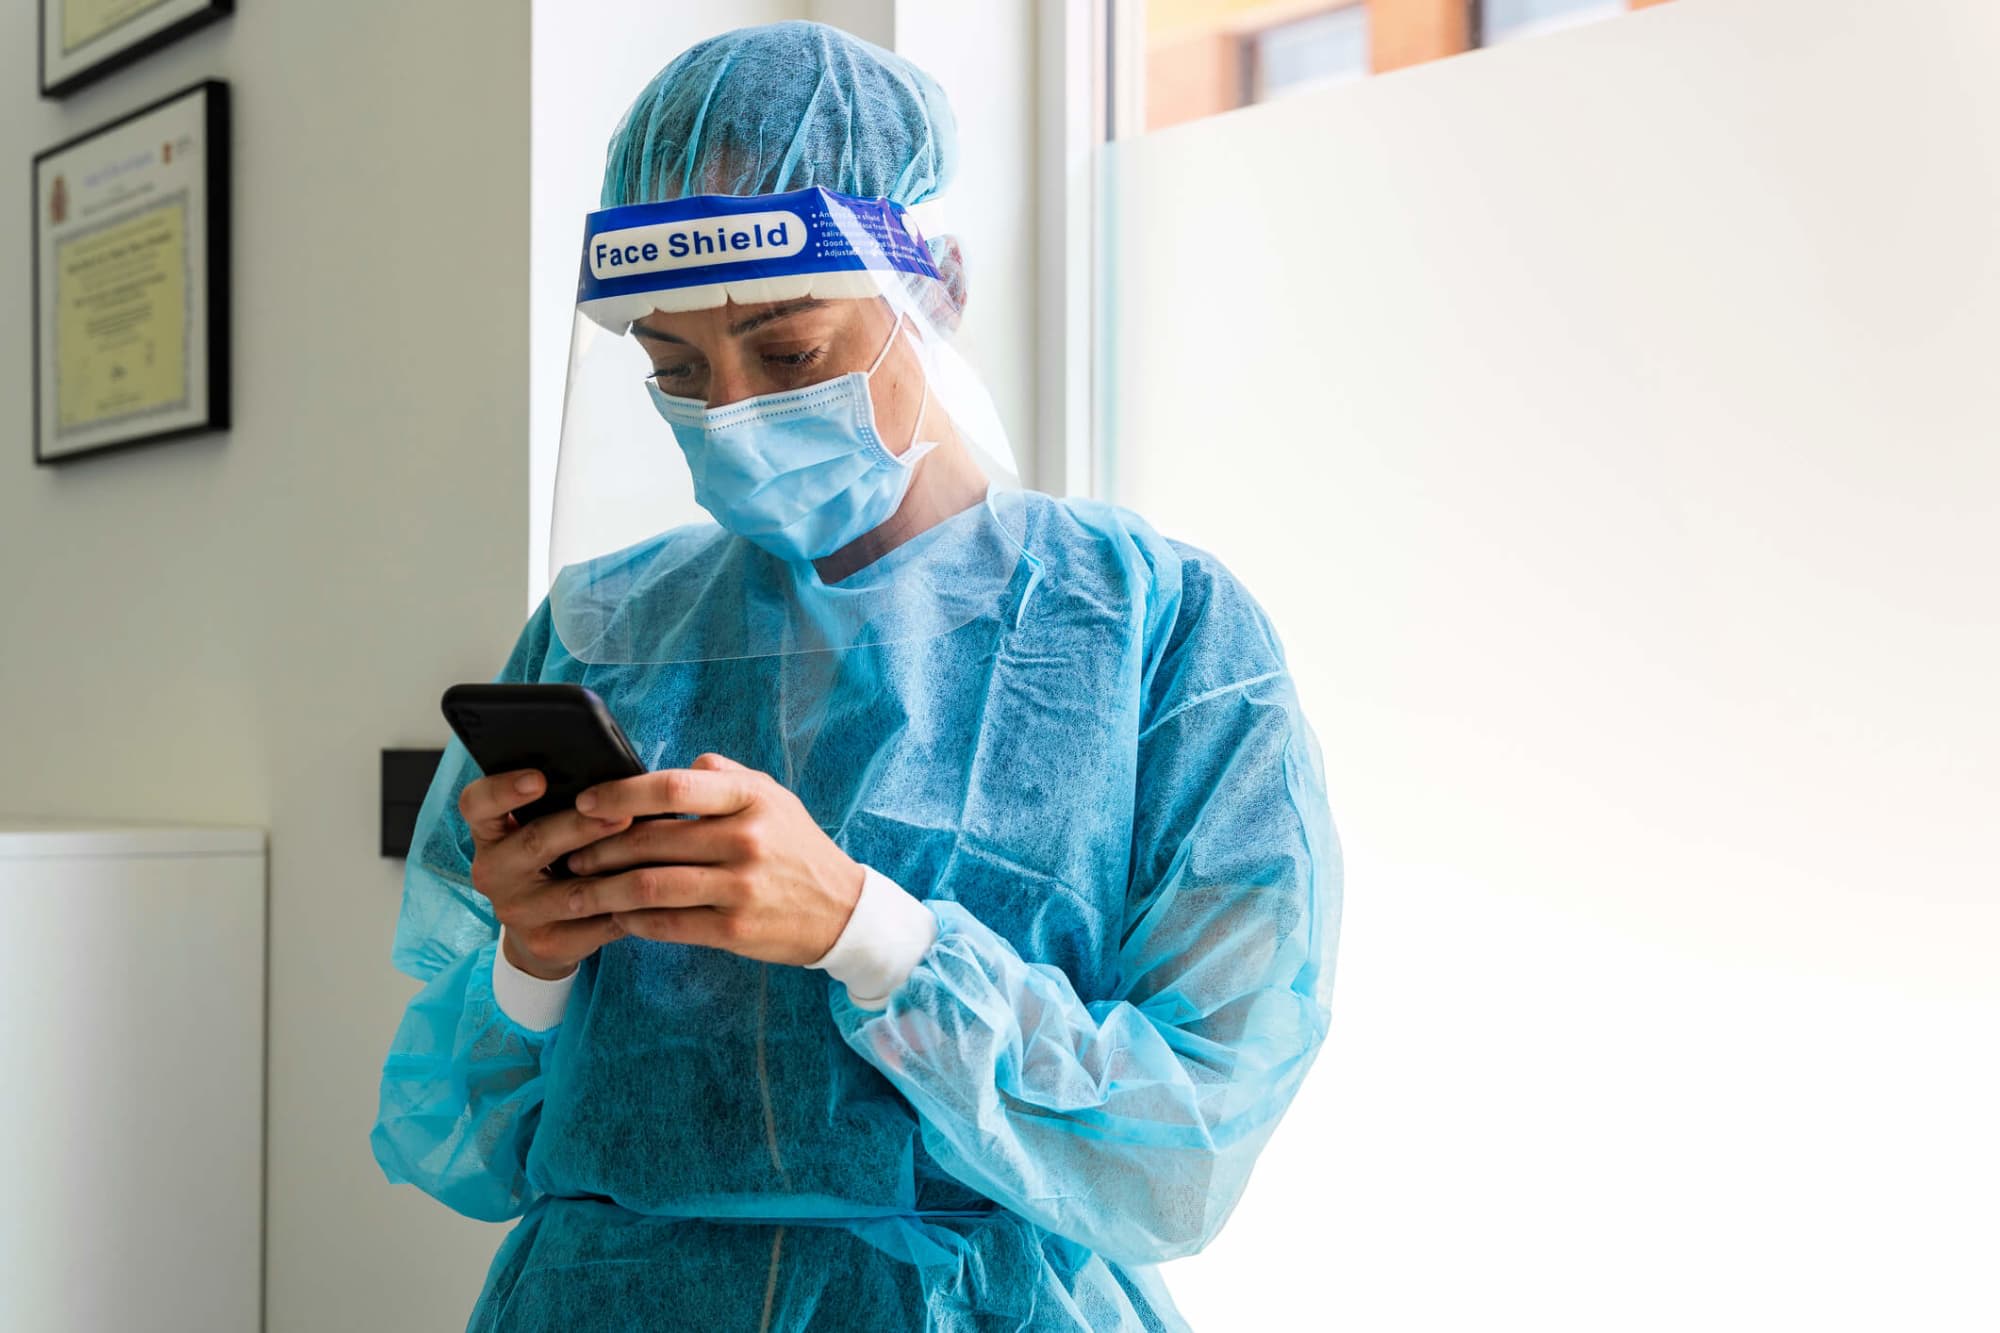 Female nurse dressed in COVID-19 protective gear texting on her smart phone in a hospital.